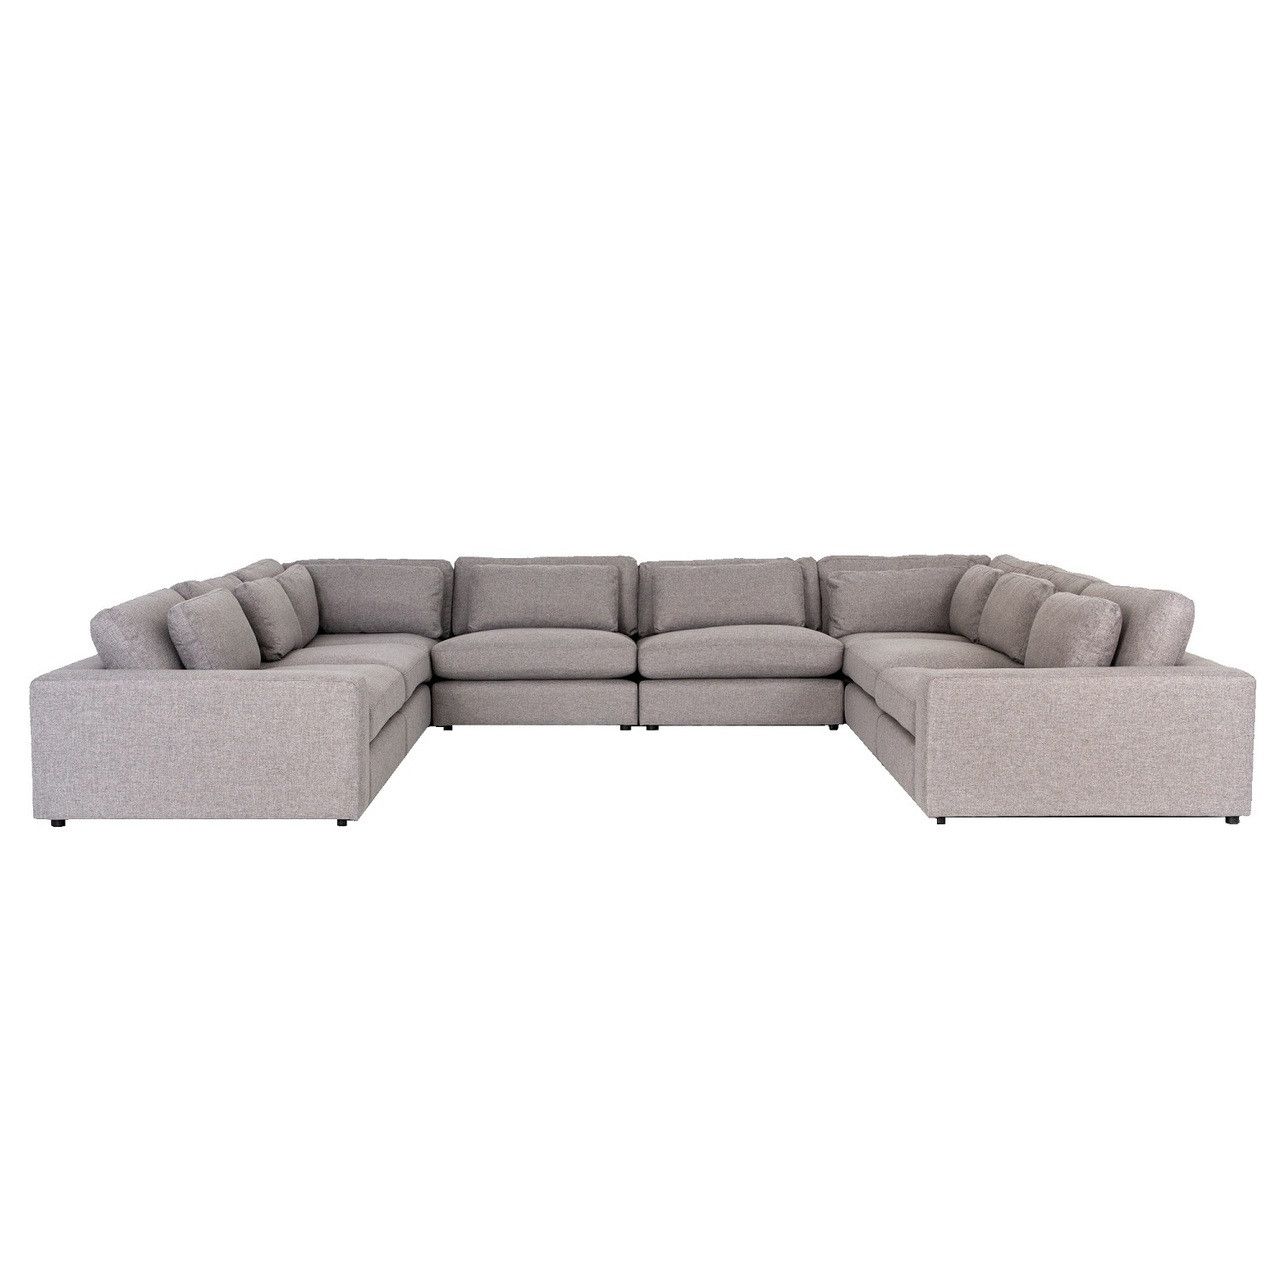 Bloor Contemporary Gray Fabric 8 Piece U Shaped Sectional Sofa 170" For Modern U Shape Sectional Sofas In Gray (View 9 of 20)